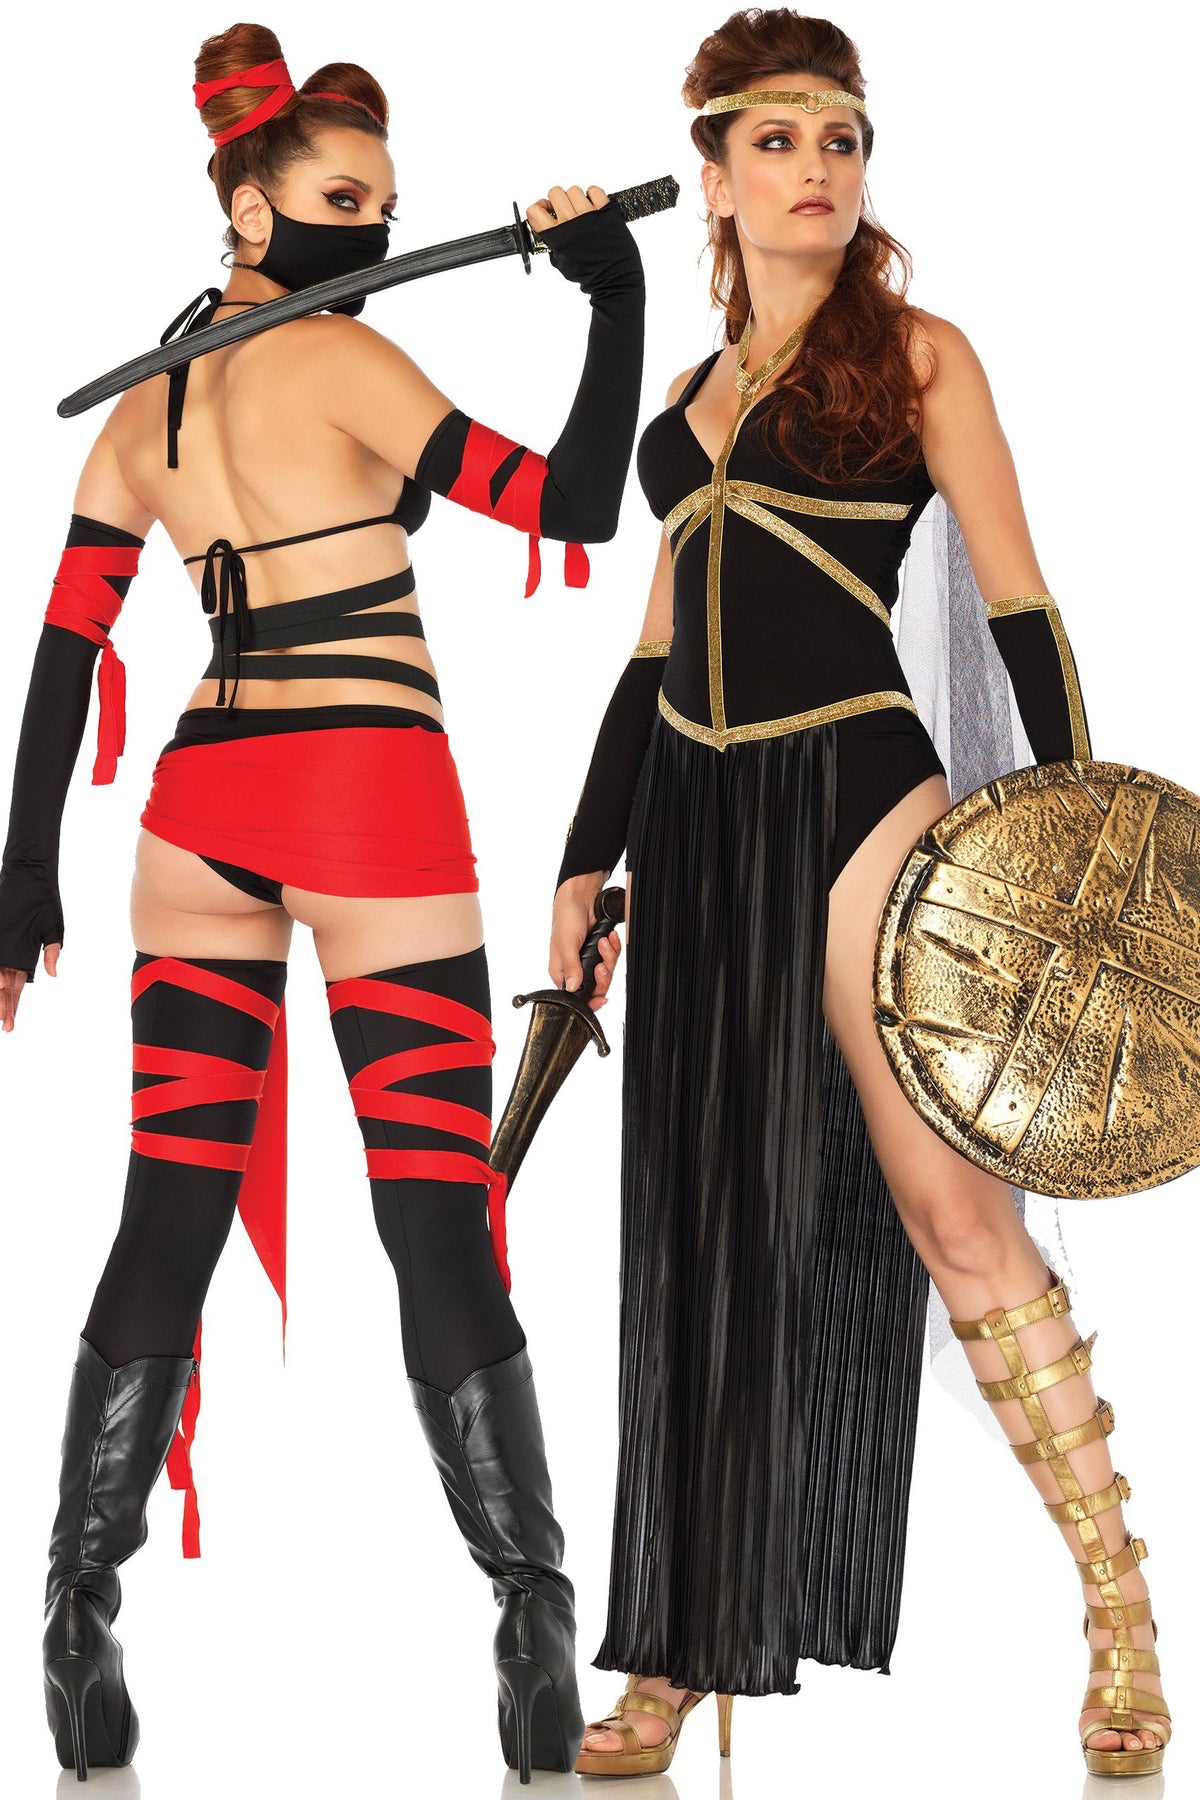 Model on left wears red and black strappy ninja costume model on left wears black and gold gladiator dress